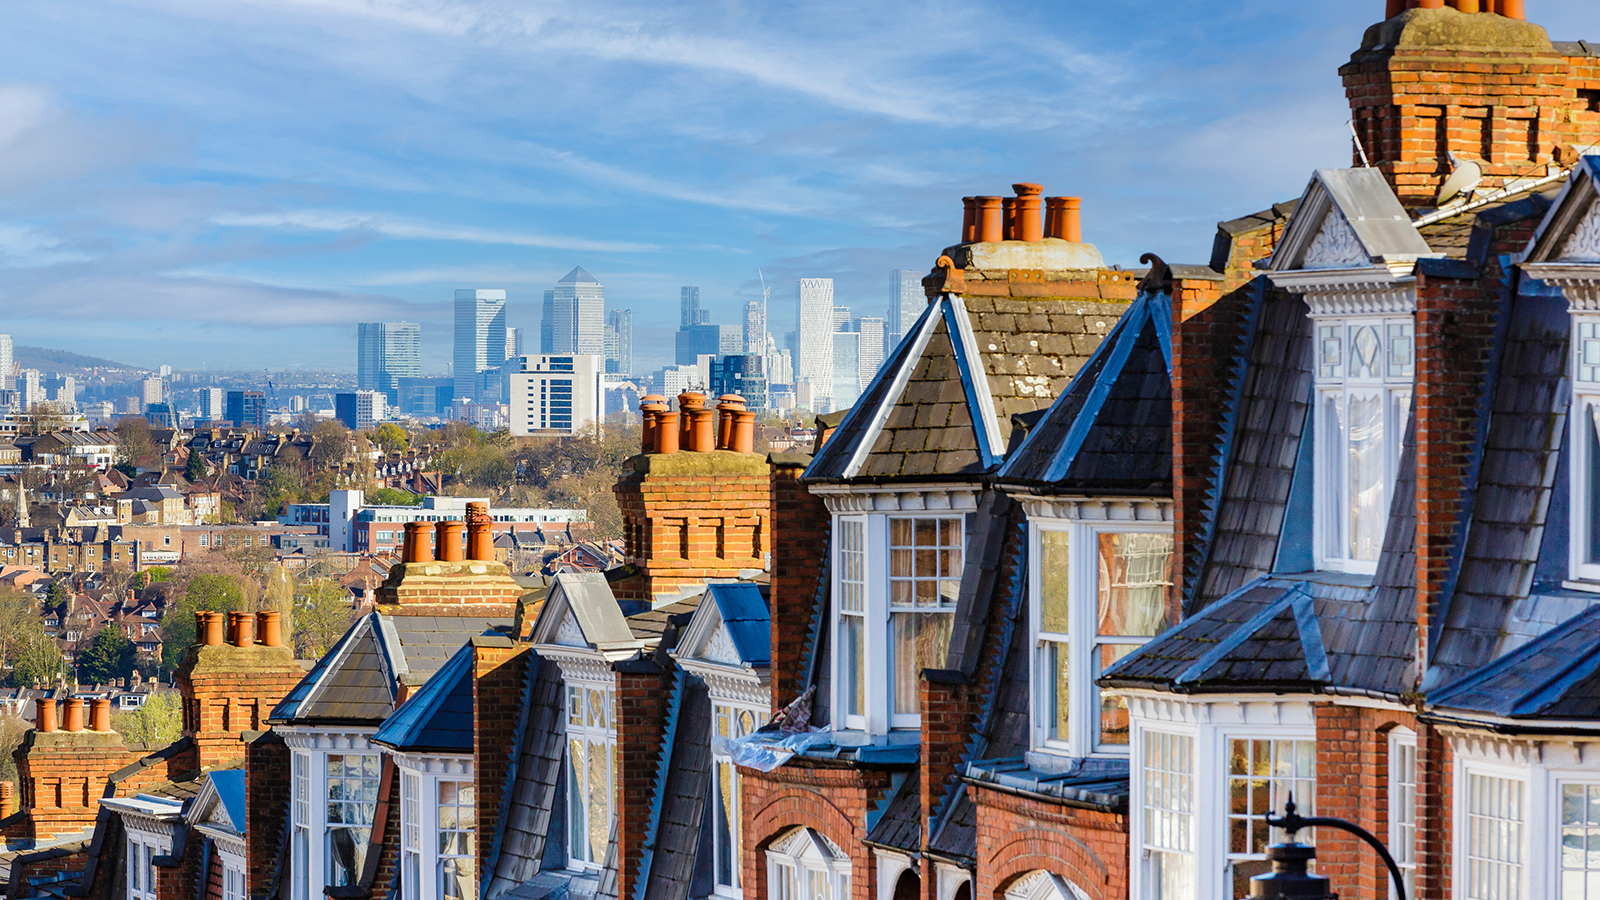 A localised approach to retrofitting cities will help the UK meet net zero targets, says Arup